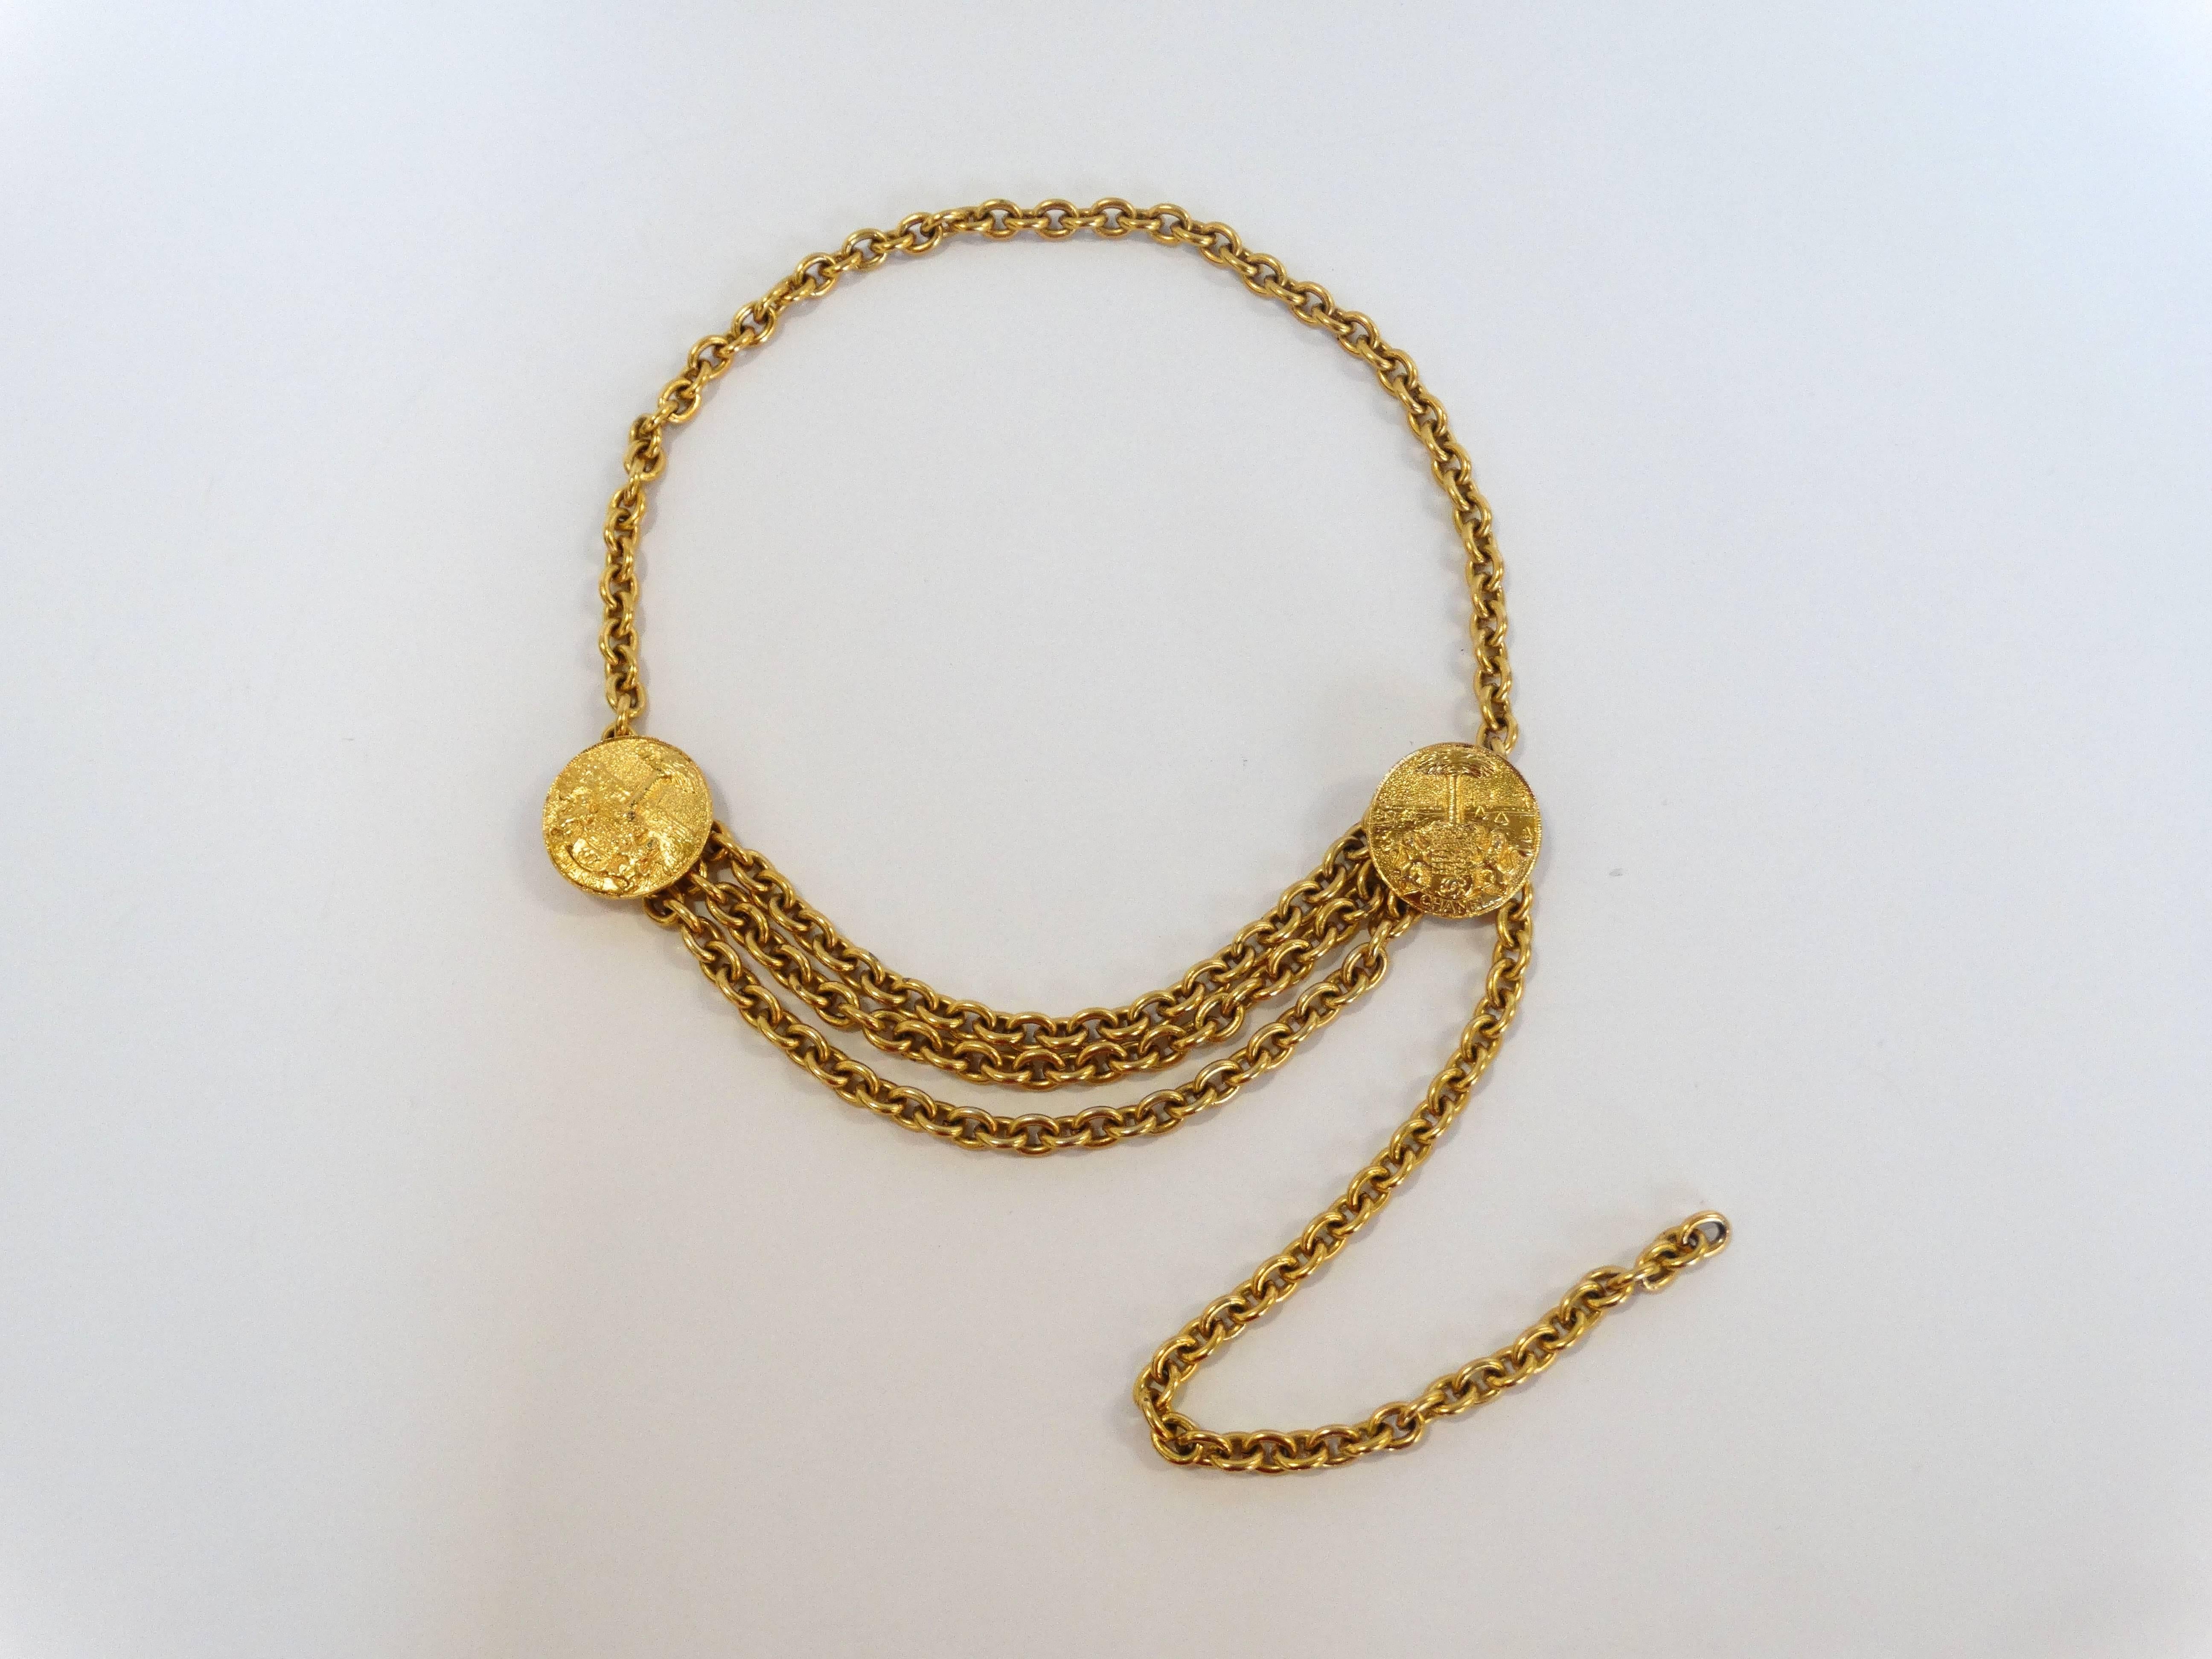 1980s Classic Chanel belt or necklace in a brilliant gold color! Heavy chain construction with two medallions at either side of the hip. Three chains hang down from the medallions to add movement and drama. Simple hook closure allows for this piece